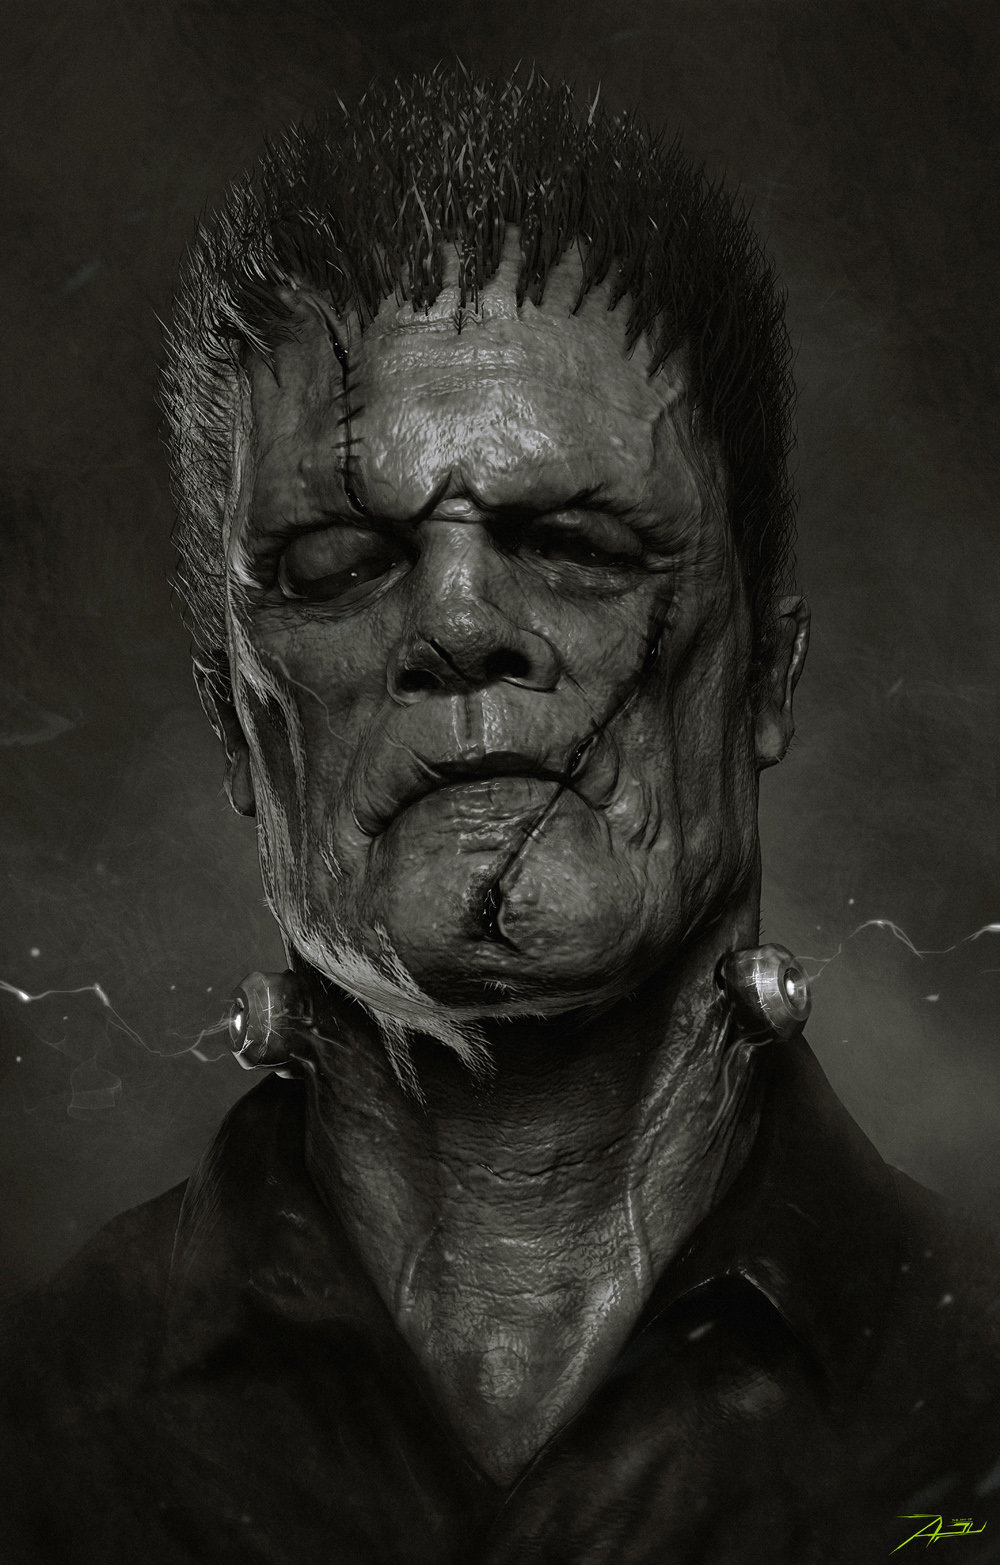 21 Pieces Of Gruesome Art From Adnan Ali